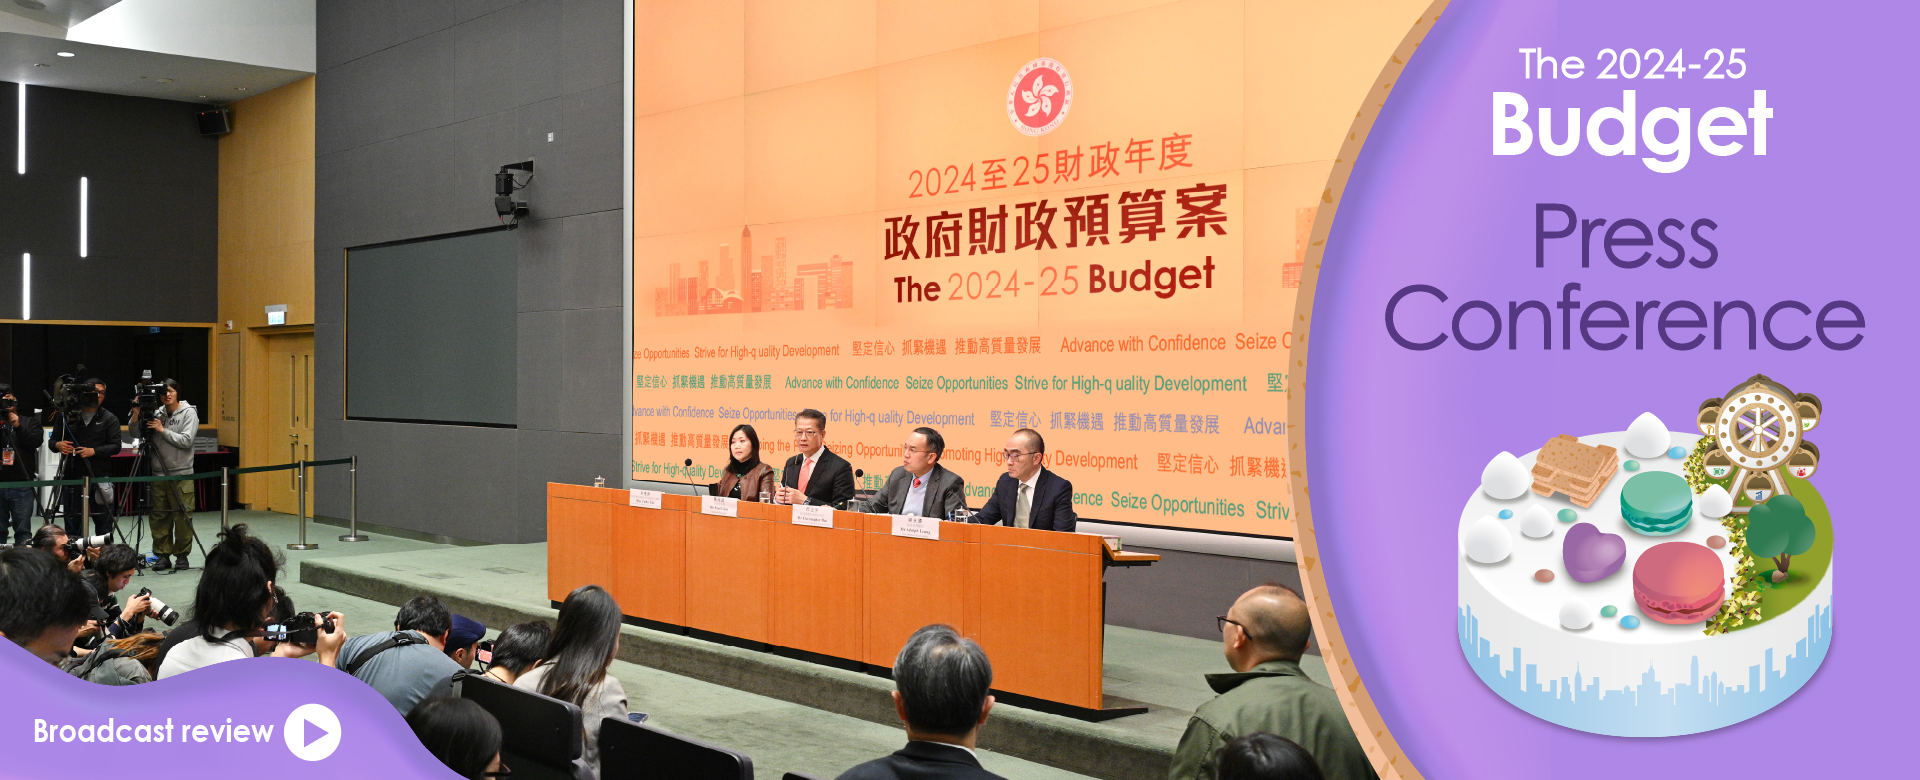 The 2024-25 Budget Press Conference review